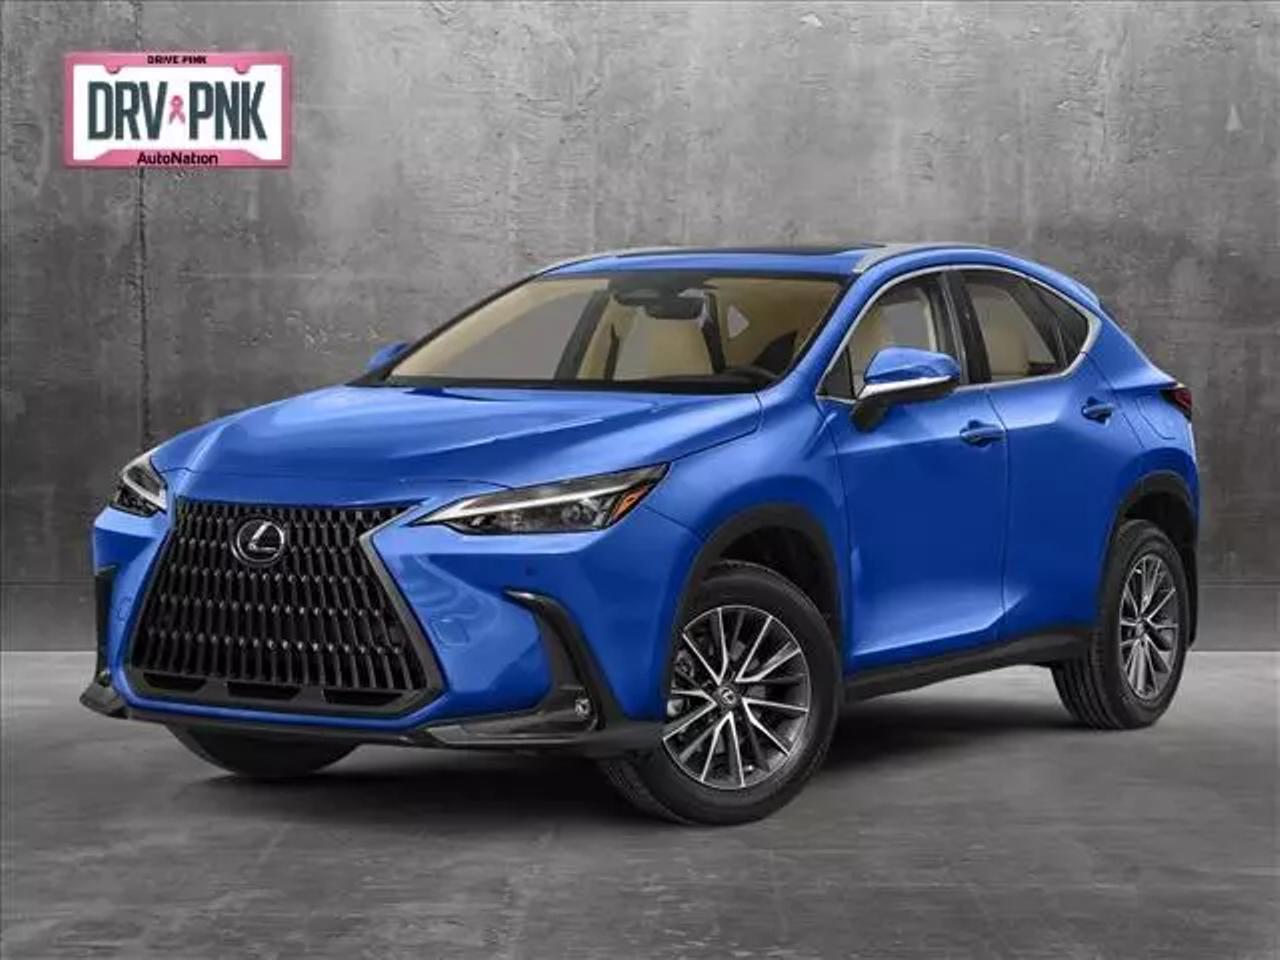 Lexus NX 350 Luxury for sale Used NX NX 350 Luxury near you in the US